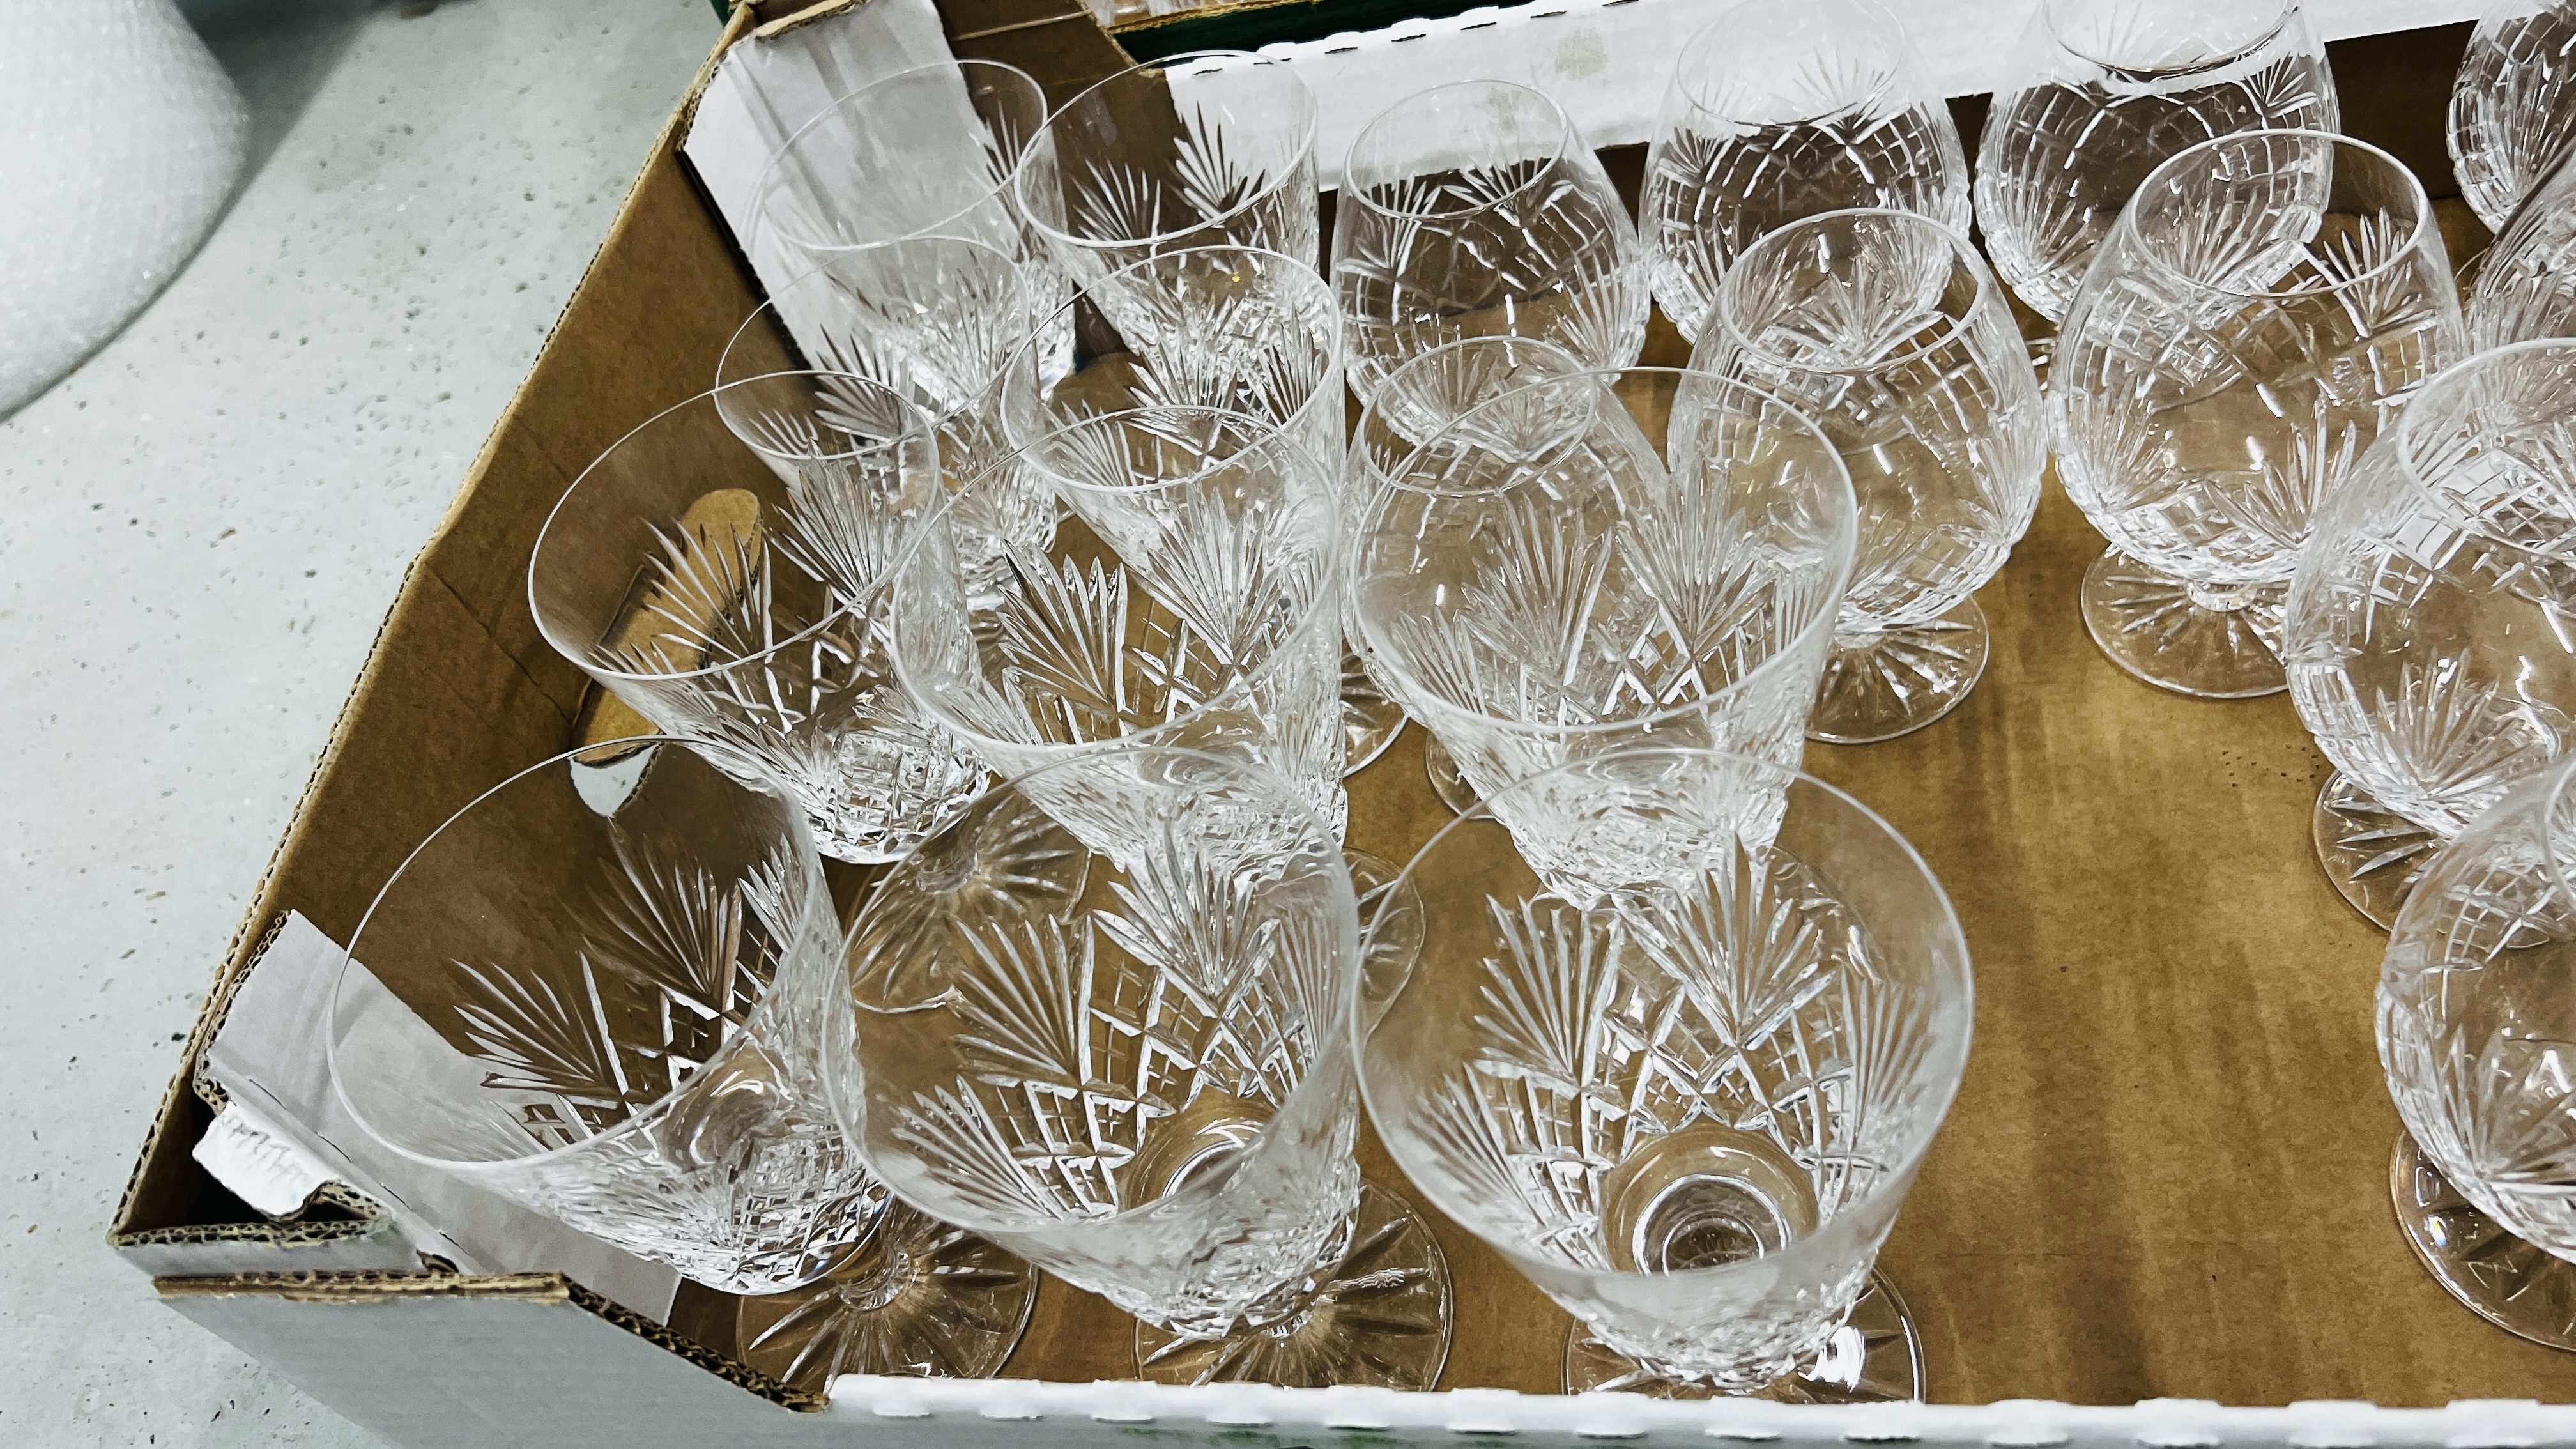 A QUANTITY GOOD QUALITY GLASSWARE INCLUDING MANY SETS, TUMBLERS, BRANDYS, FLUTES, SHERRY ETC. - Image 5 of 7